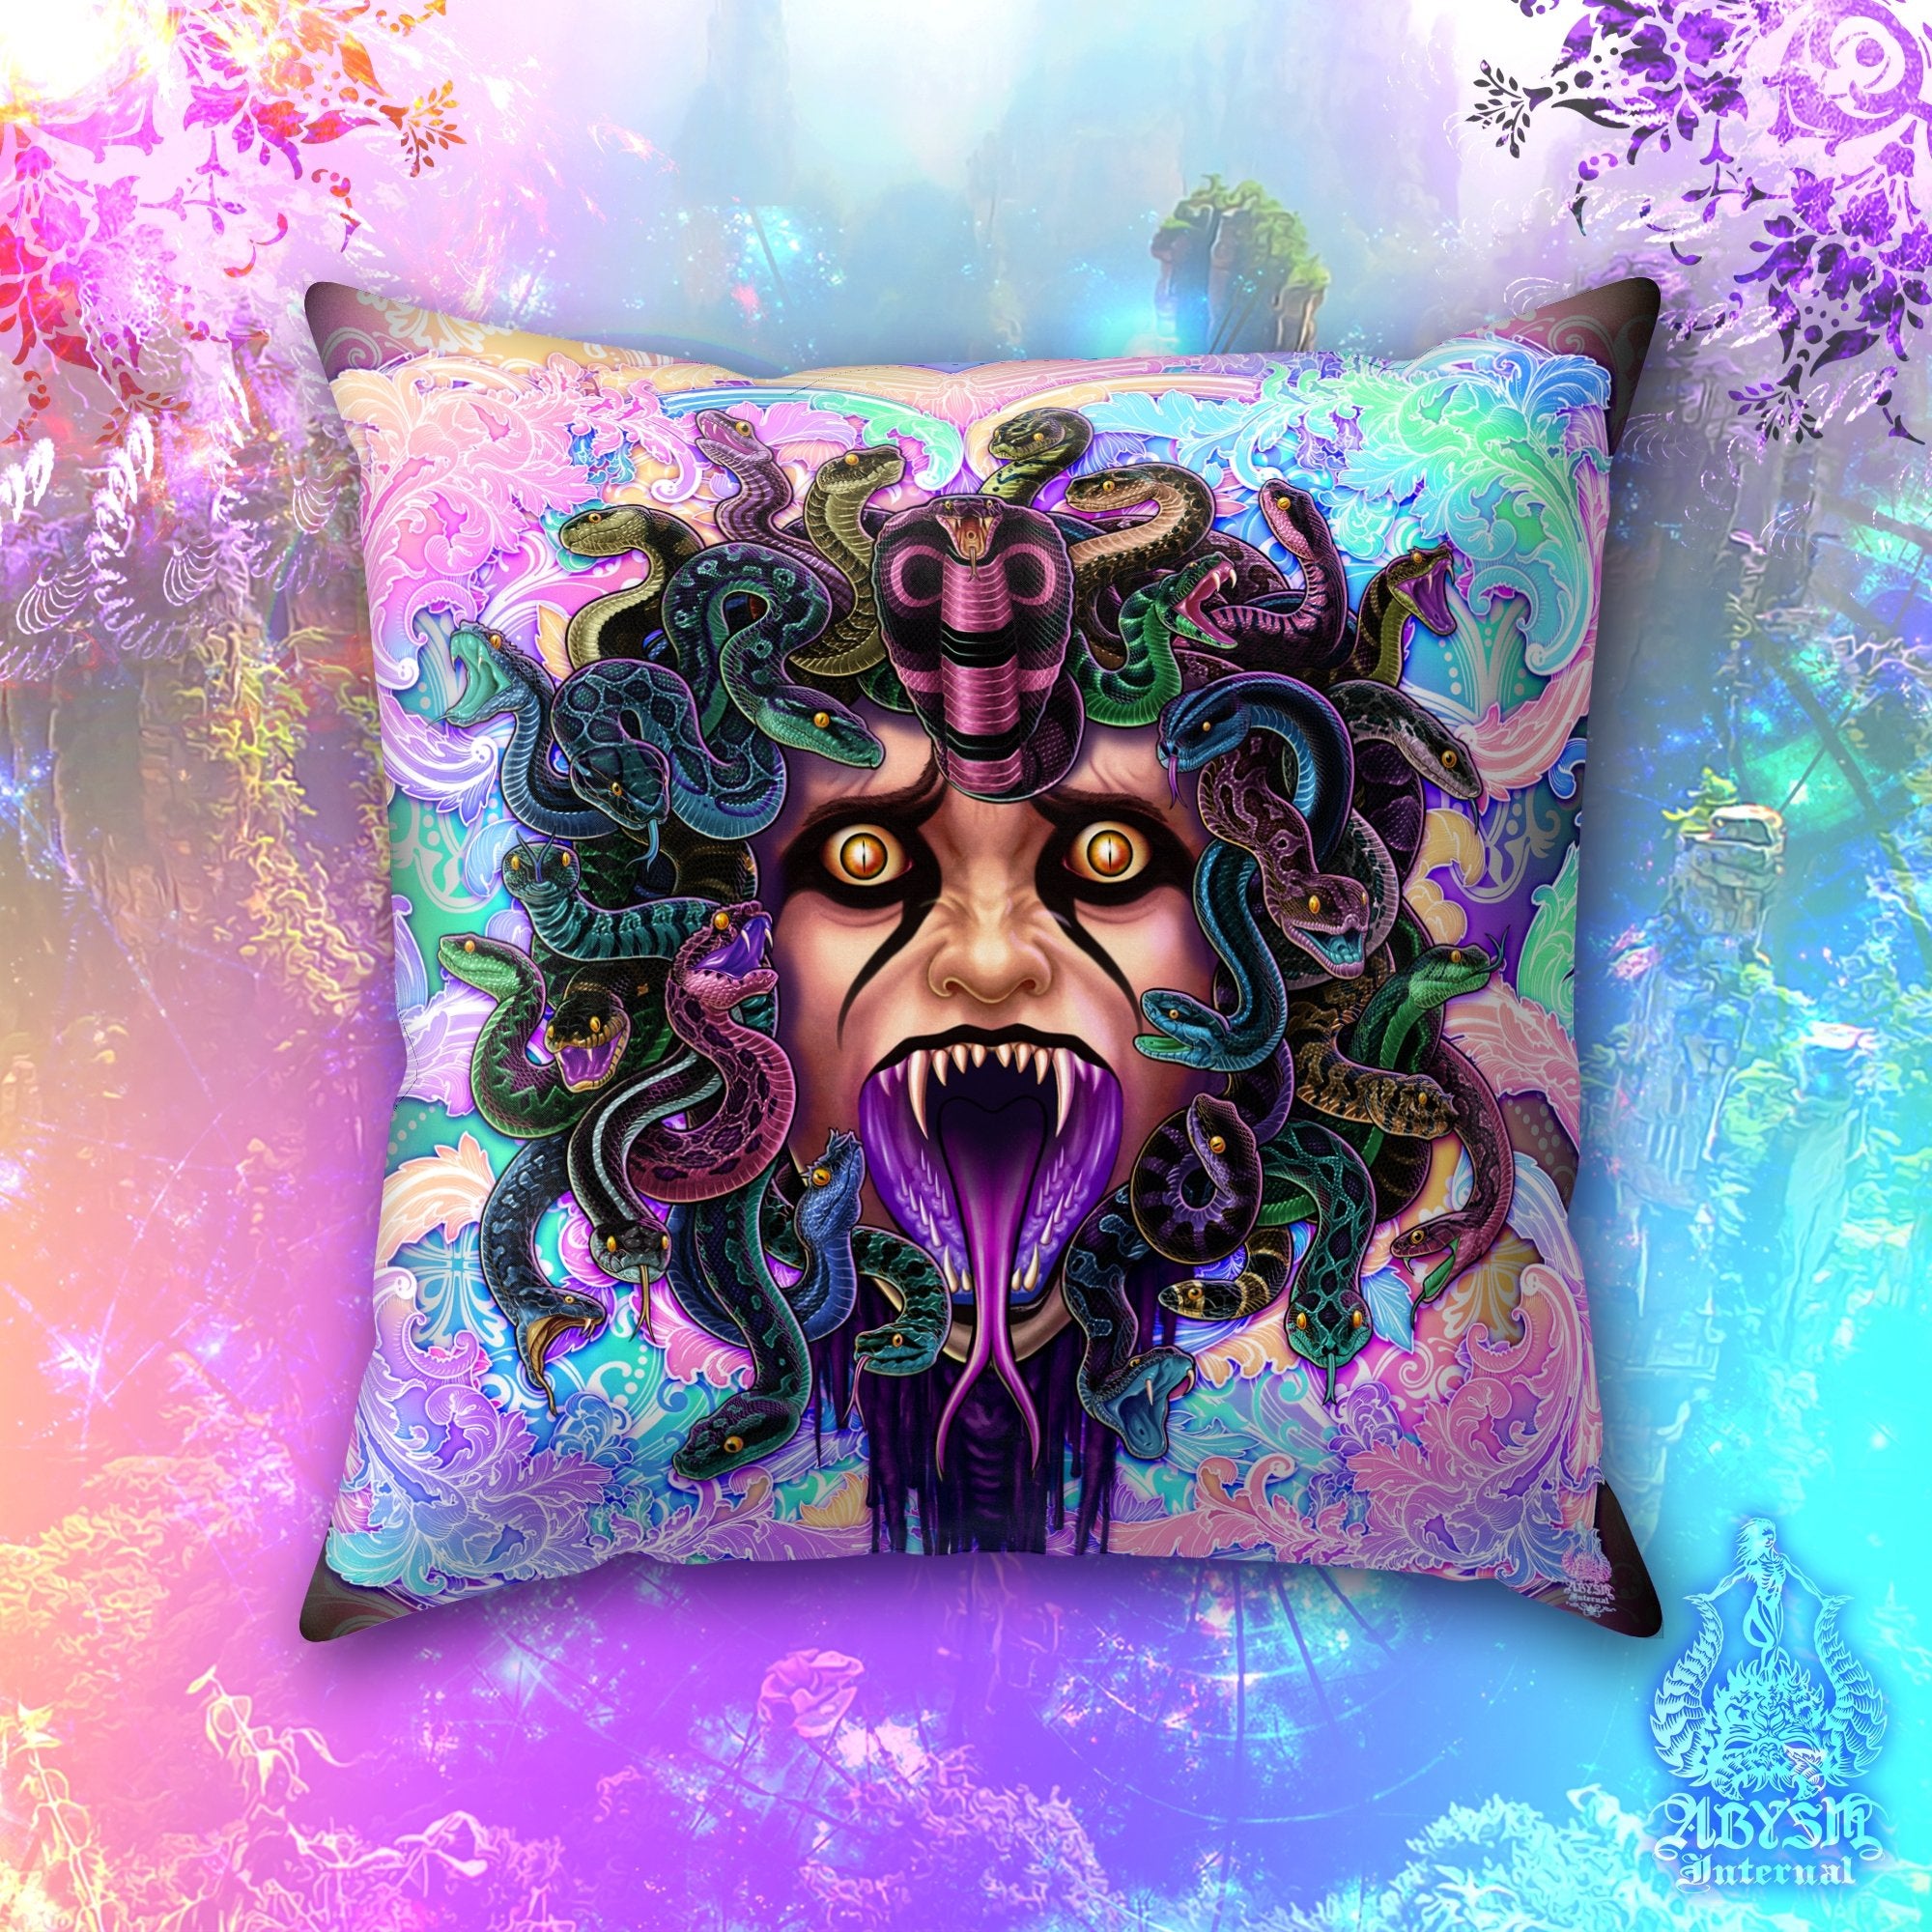 Psychedelic Medusa Throw Pillow, Decorative Accent Cushion, Fantasy Room Decor, Funky and Eclectic Home - Pastel Punk Black, Scream - Abysm Internal